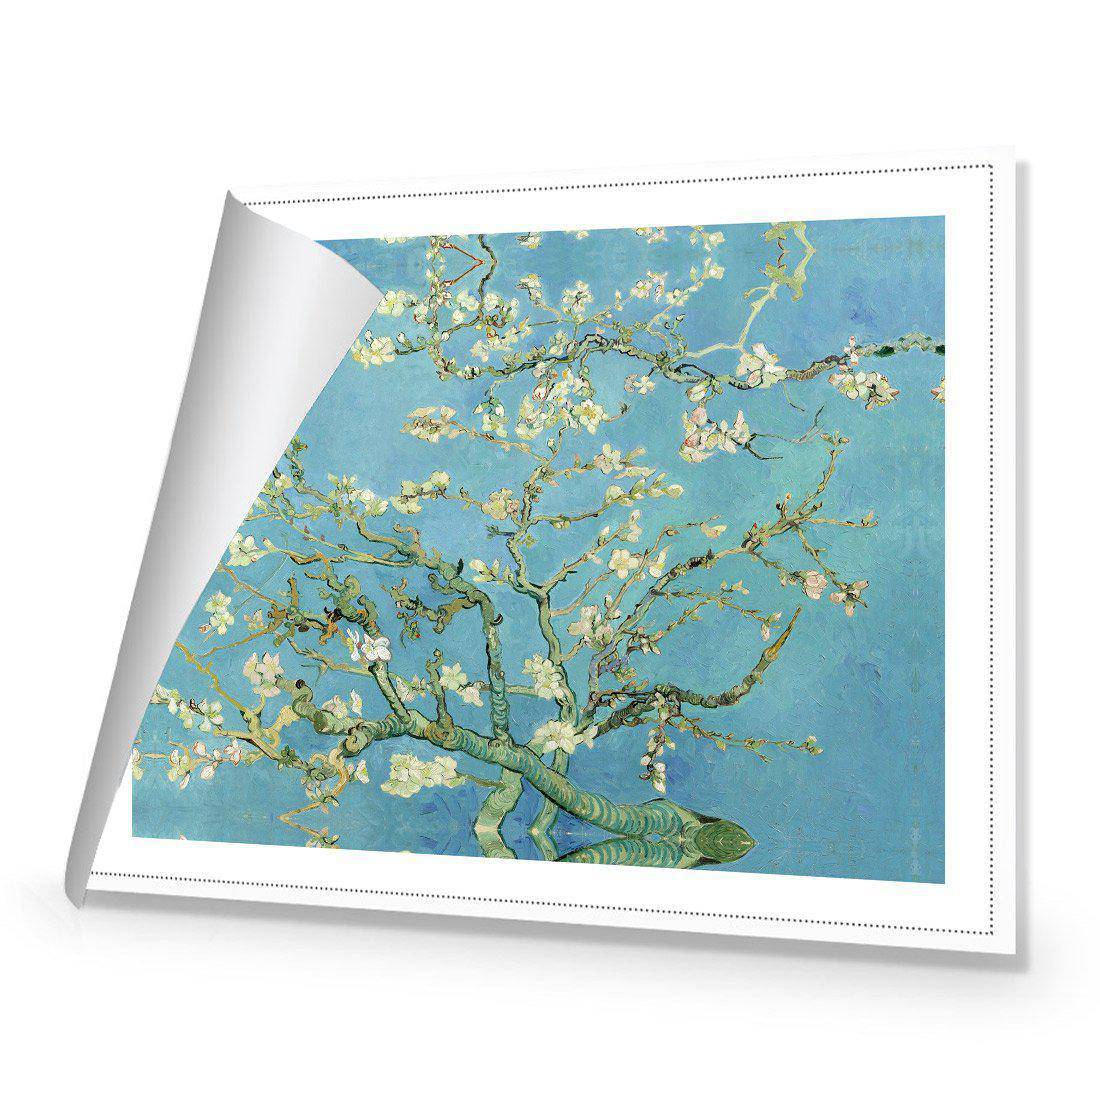 Blossoming Almond Tree by Van Gogh Canvas Art-Canvas-Wall Art Designs-45x30cm-Rolled Canvas-Wall Art Designs